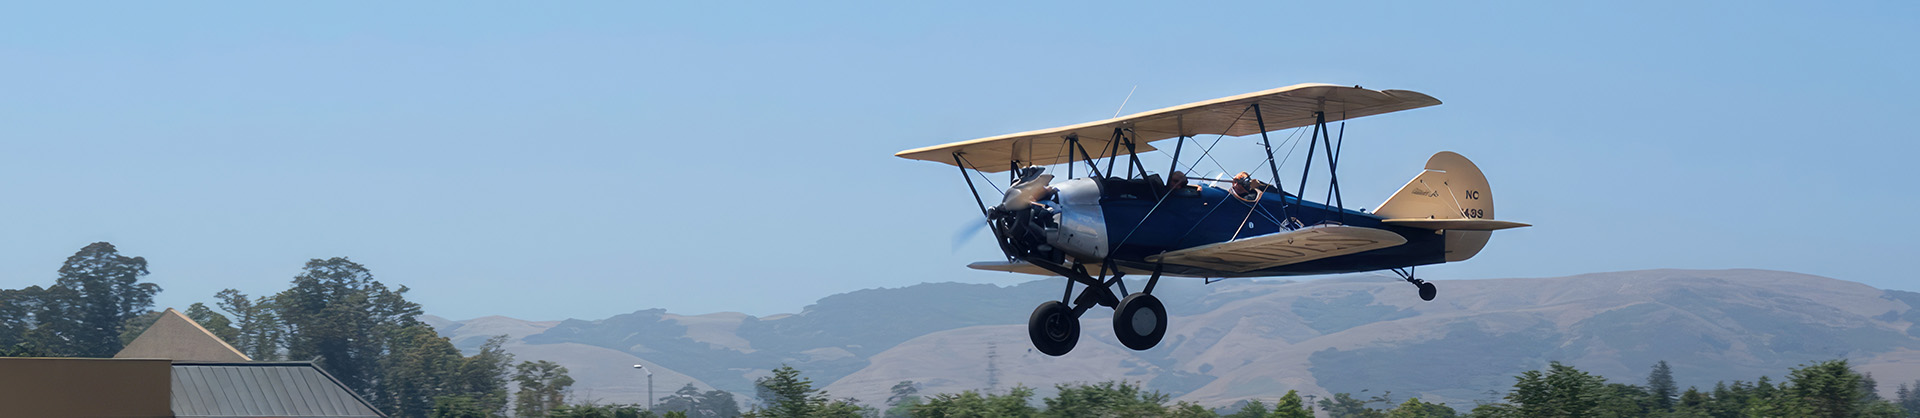 low-flying bi-plane with sonoma hills in background